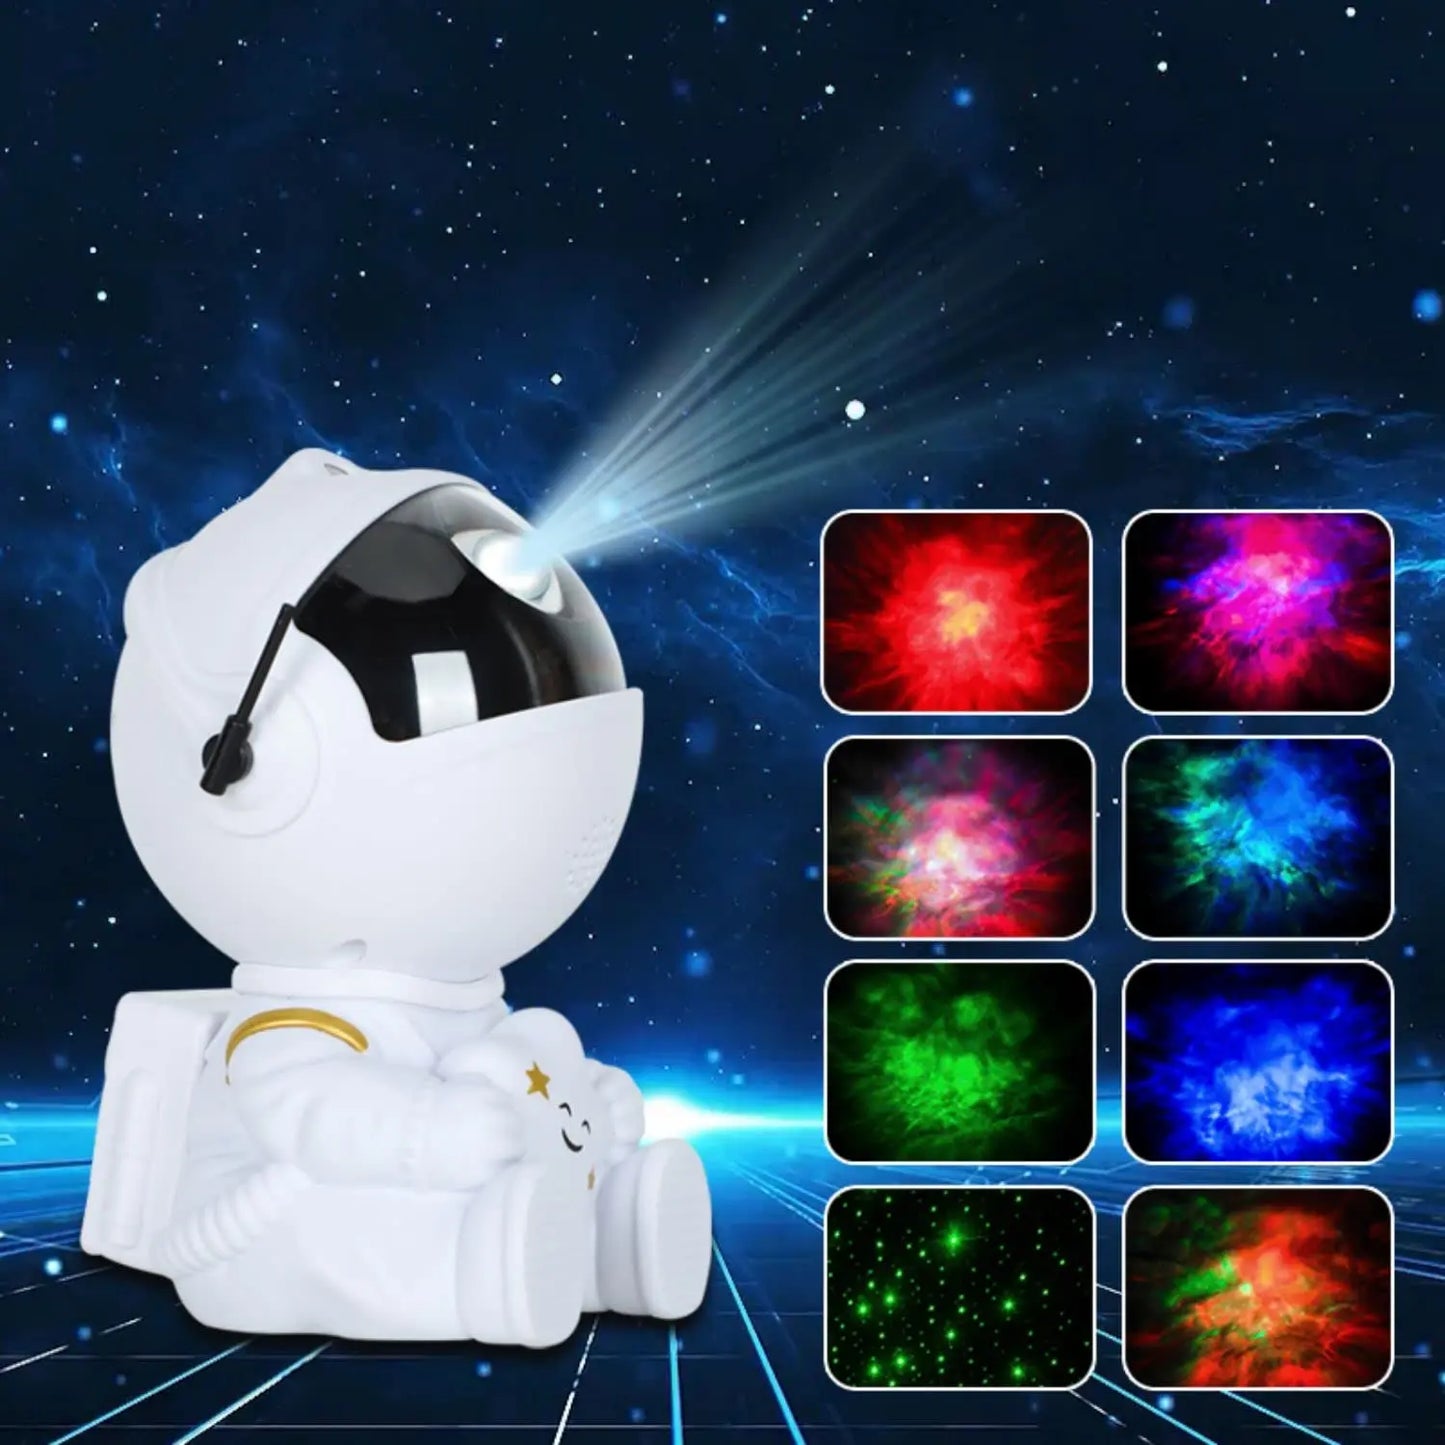 Galaxy Star Astronaut Projector LED Night Light Starry Sky Porjectors Lamp Decoration Bedroom Room Decorative for Children Gifts